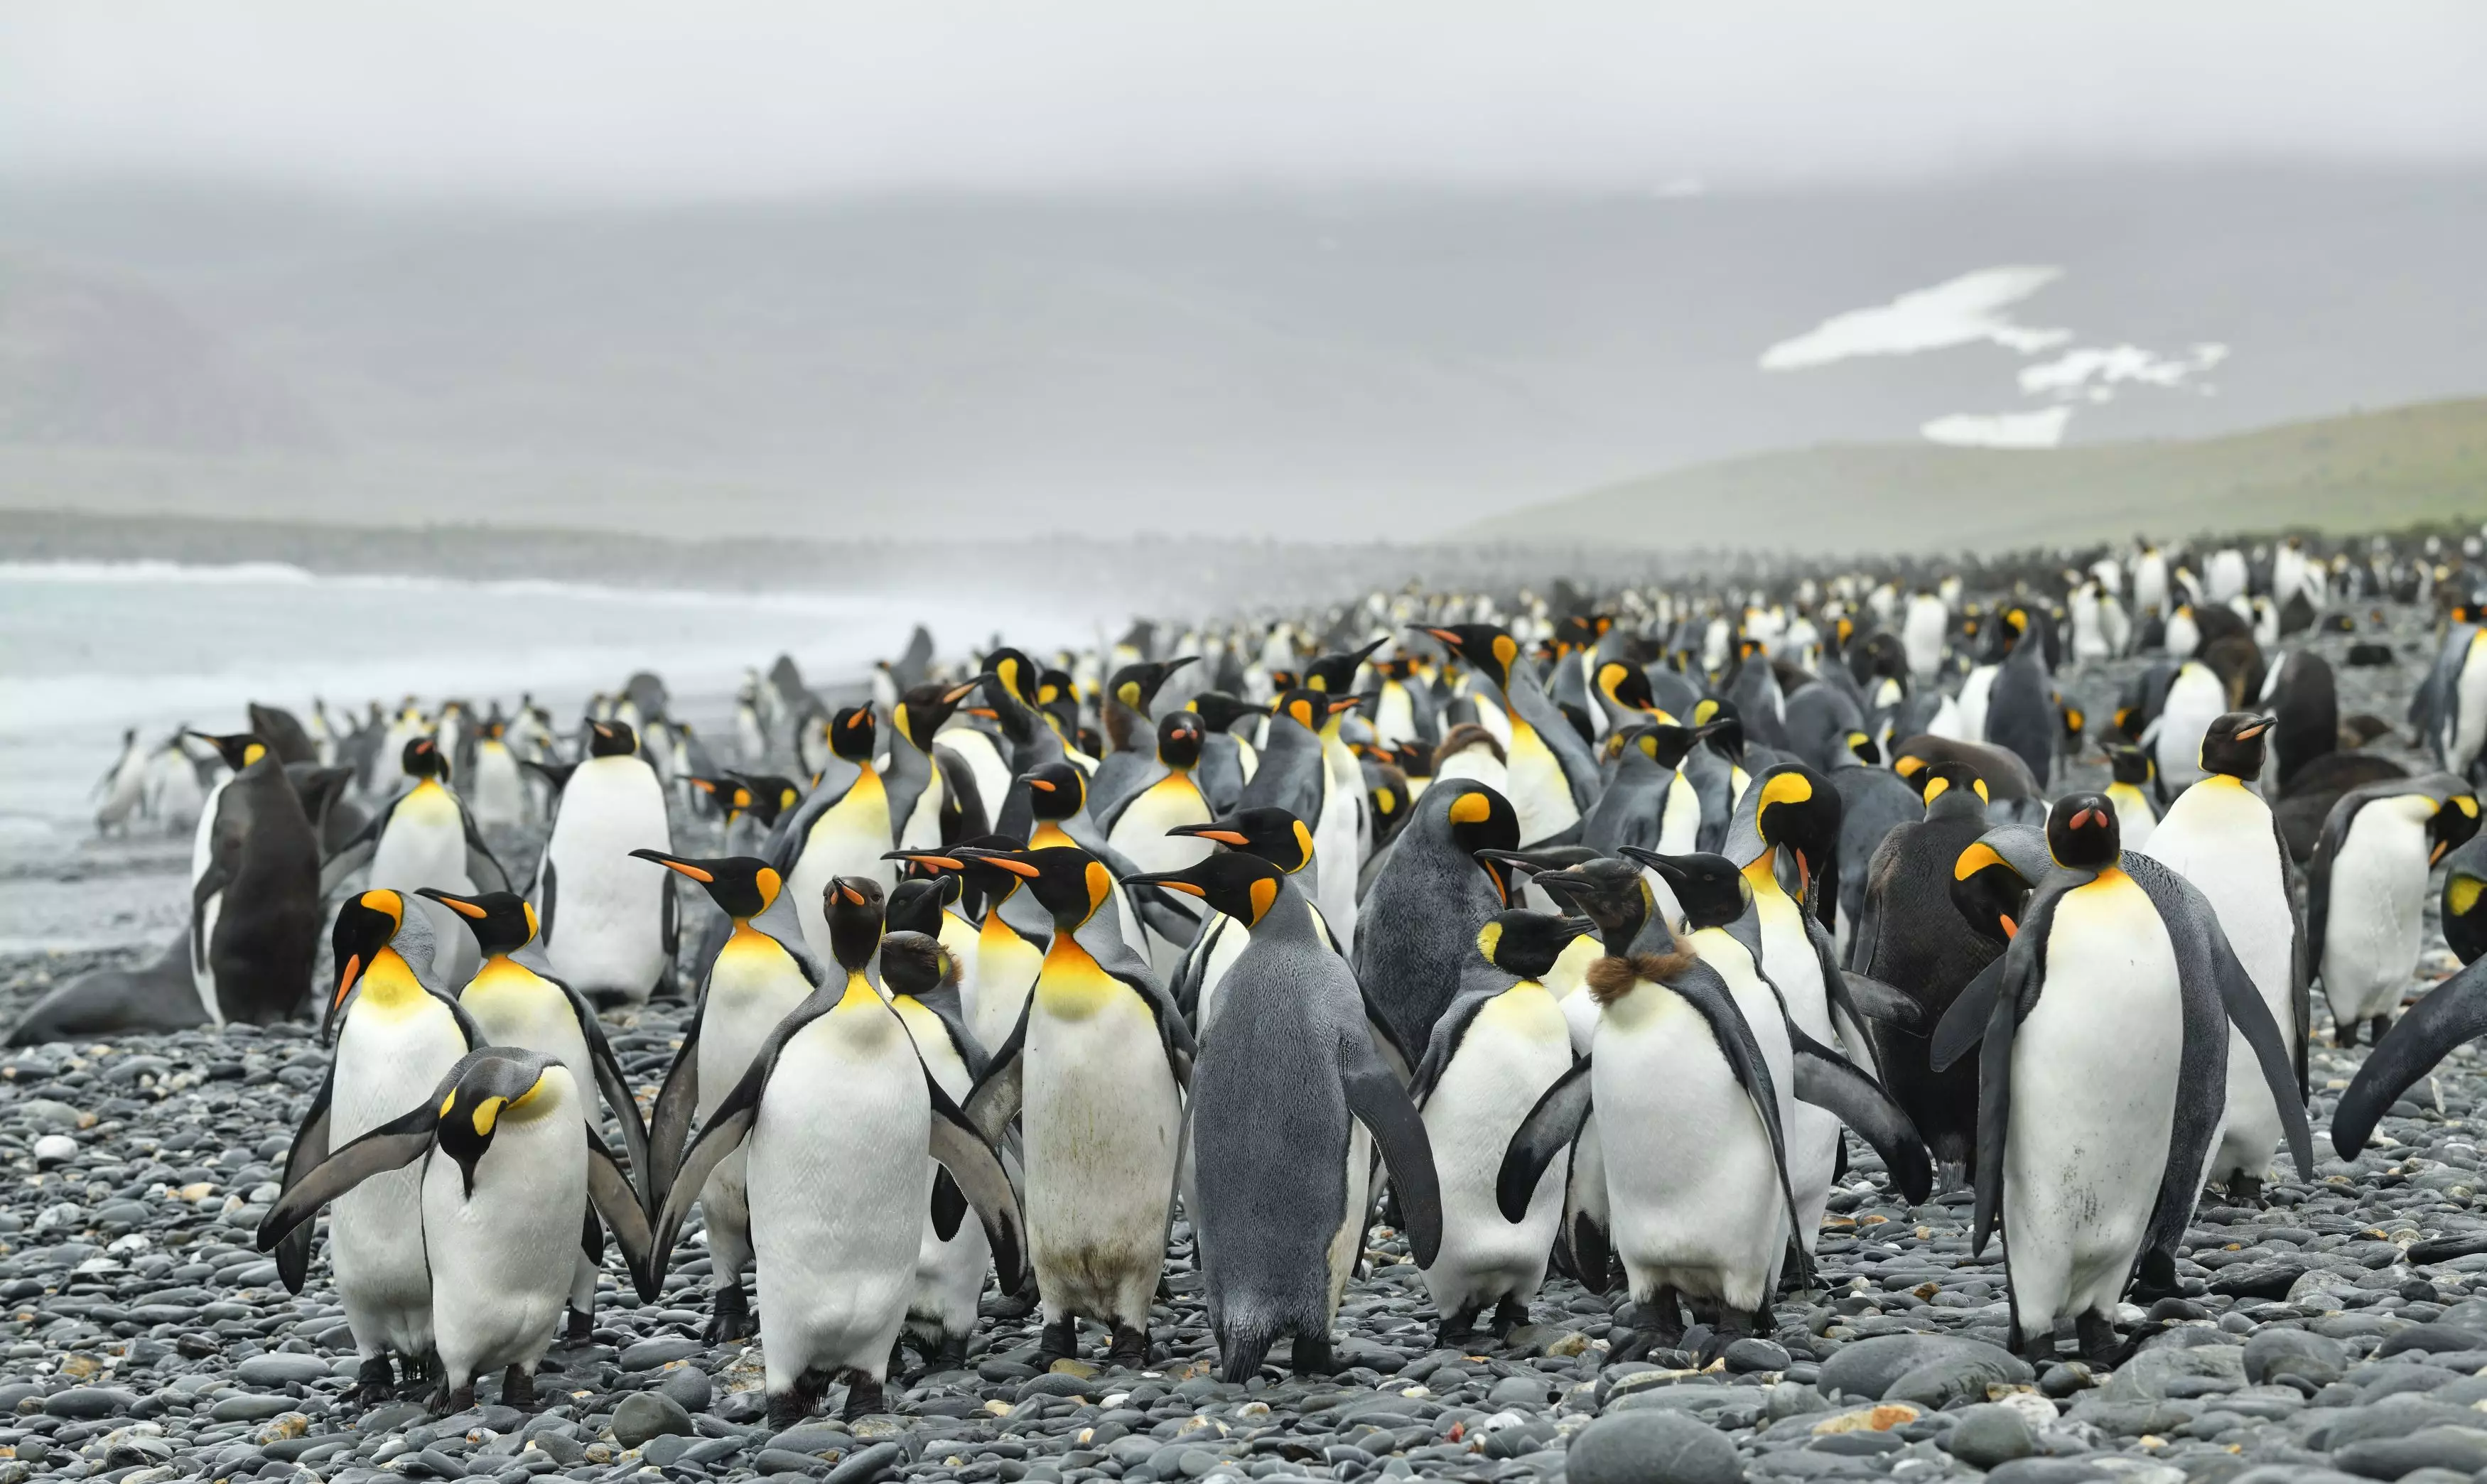 Yves noticed the bright yellow penguin standing amongst a group of familiar looking penguins (